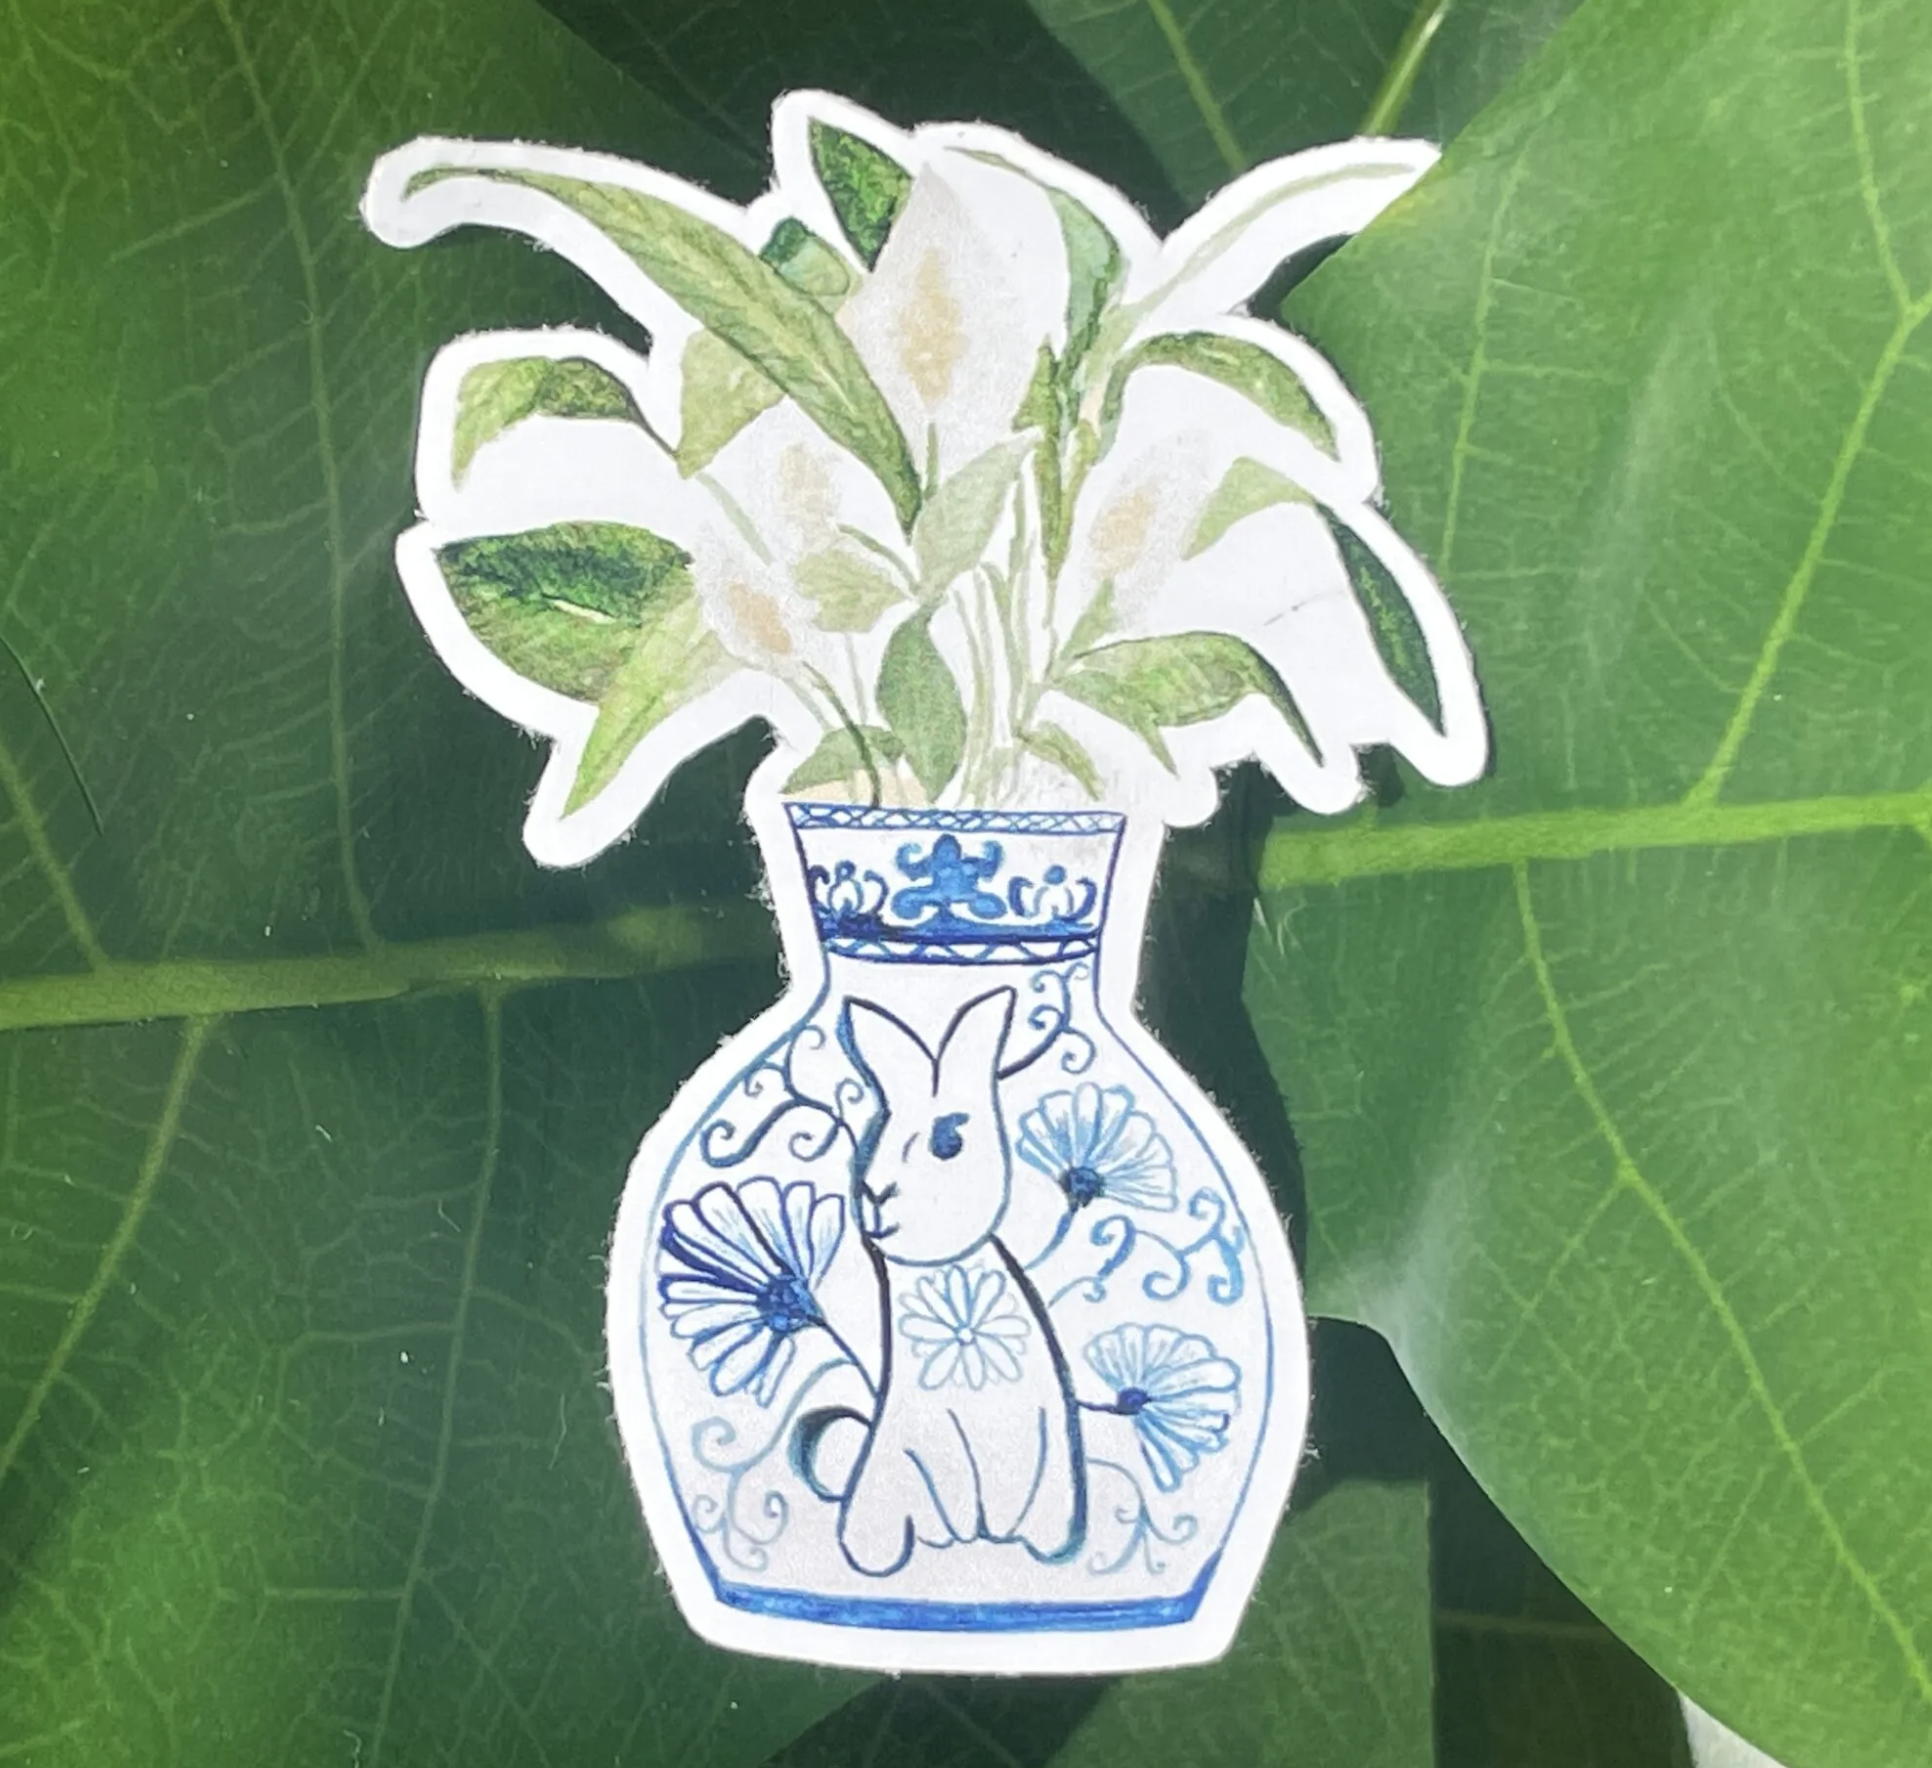 drawing Rabbit on plant vase as a sticker